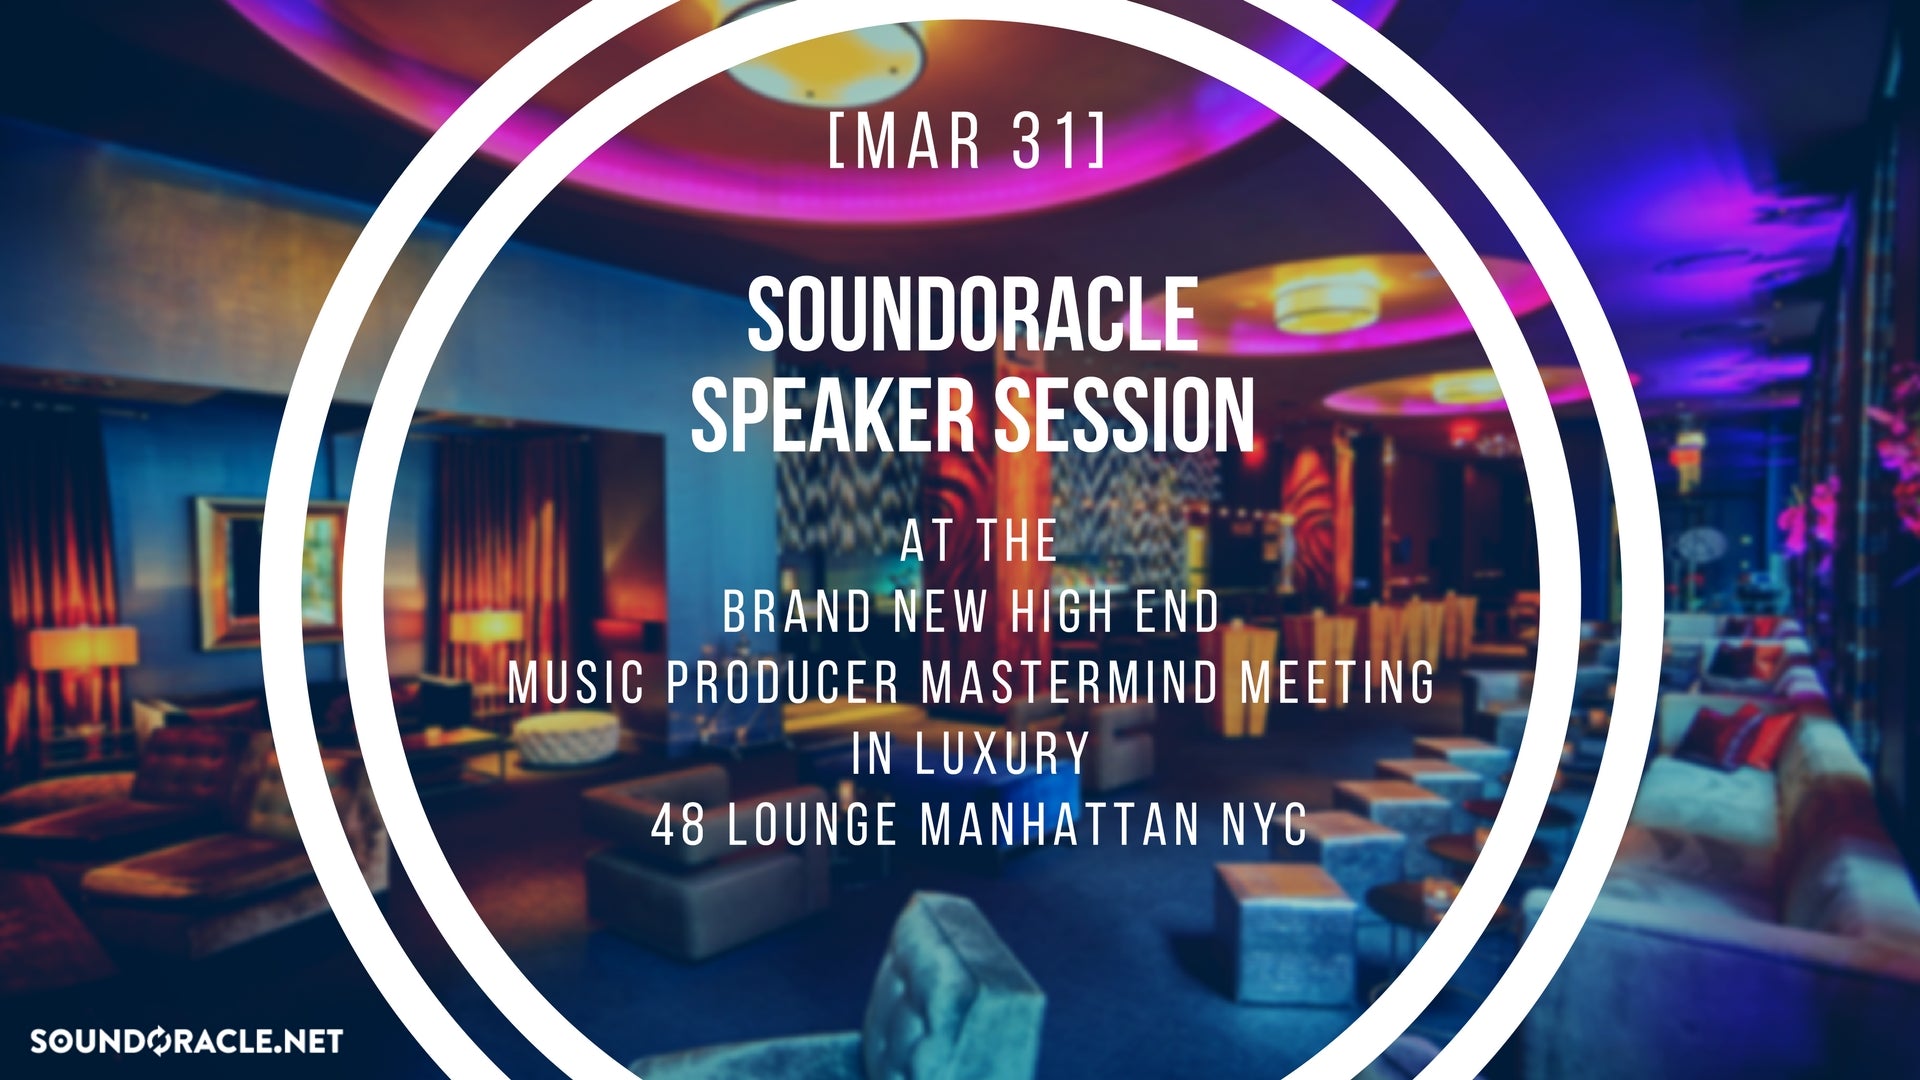 [Mar 31] SoundOracle Speaker Session at the Brand New High End Music Producer Mastermind Meeting in Luxury 48 Lounge Manhattan NYC